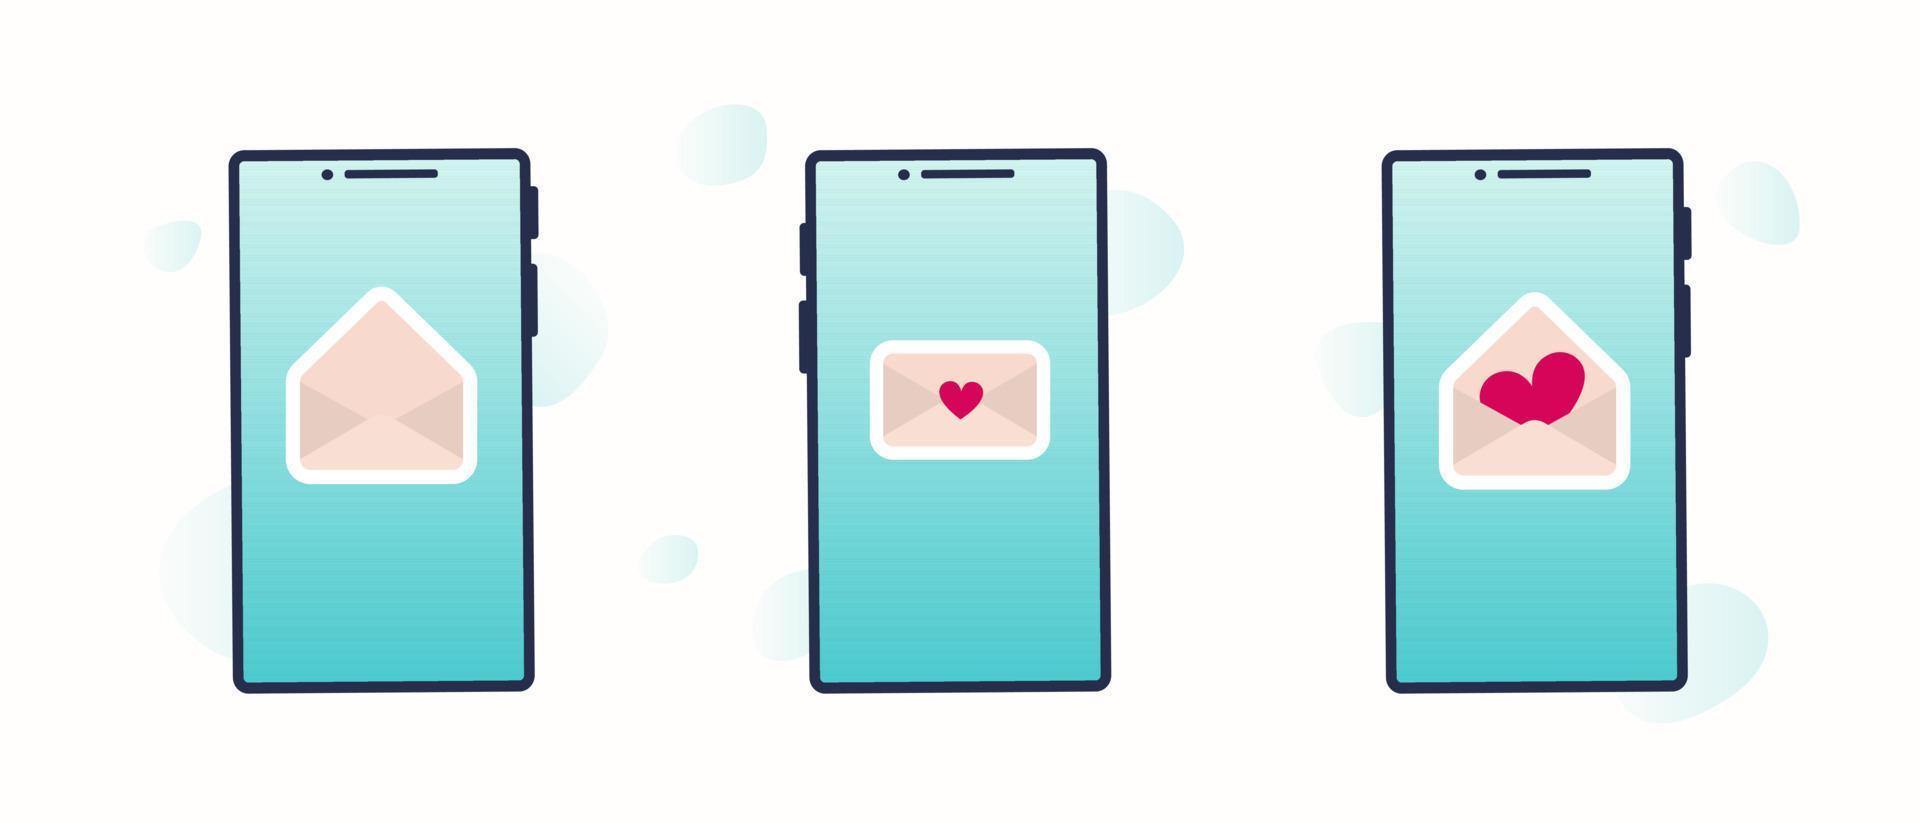 Sending love message concept. Web sites, banners, infographics design. Set of mobile phones with message, heart vector sign icon. Set of vector flat cartoon illustrations for valentine's day.